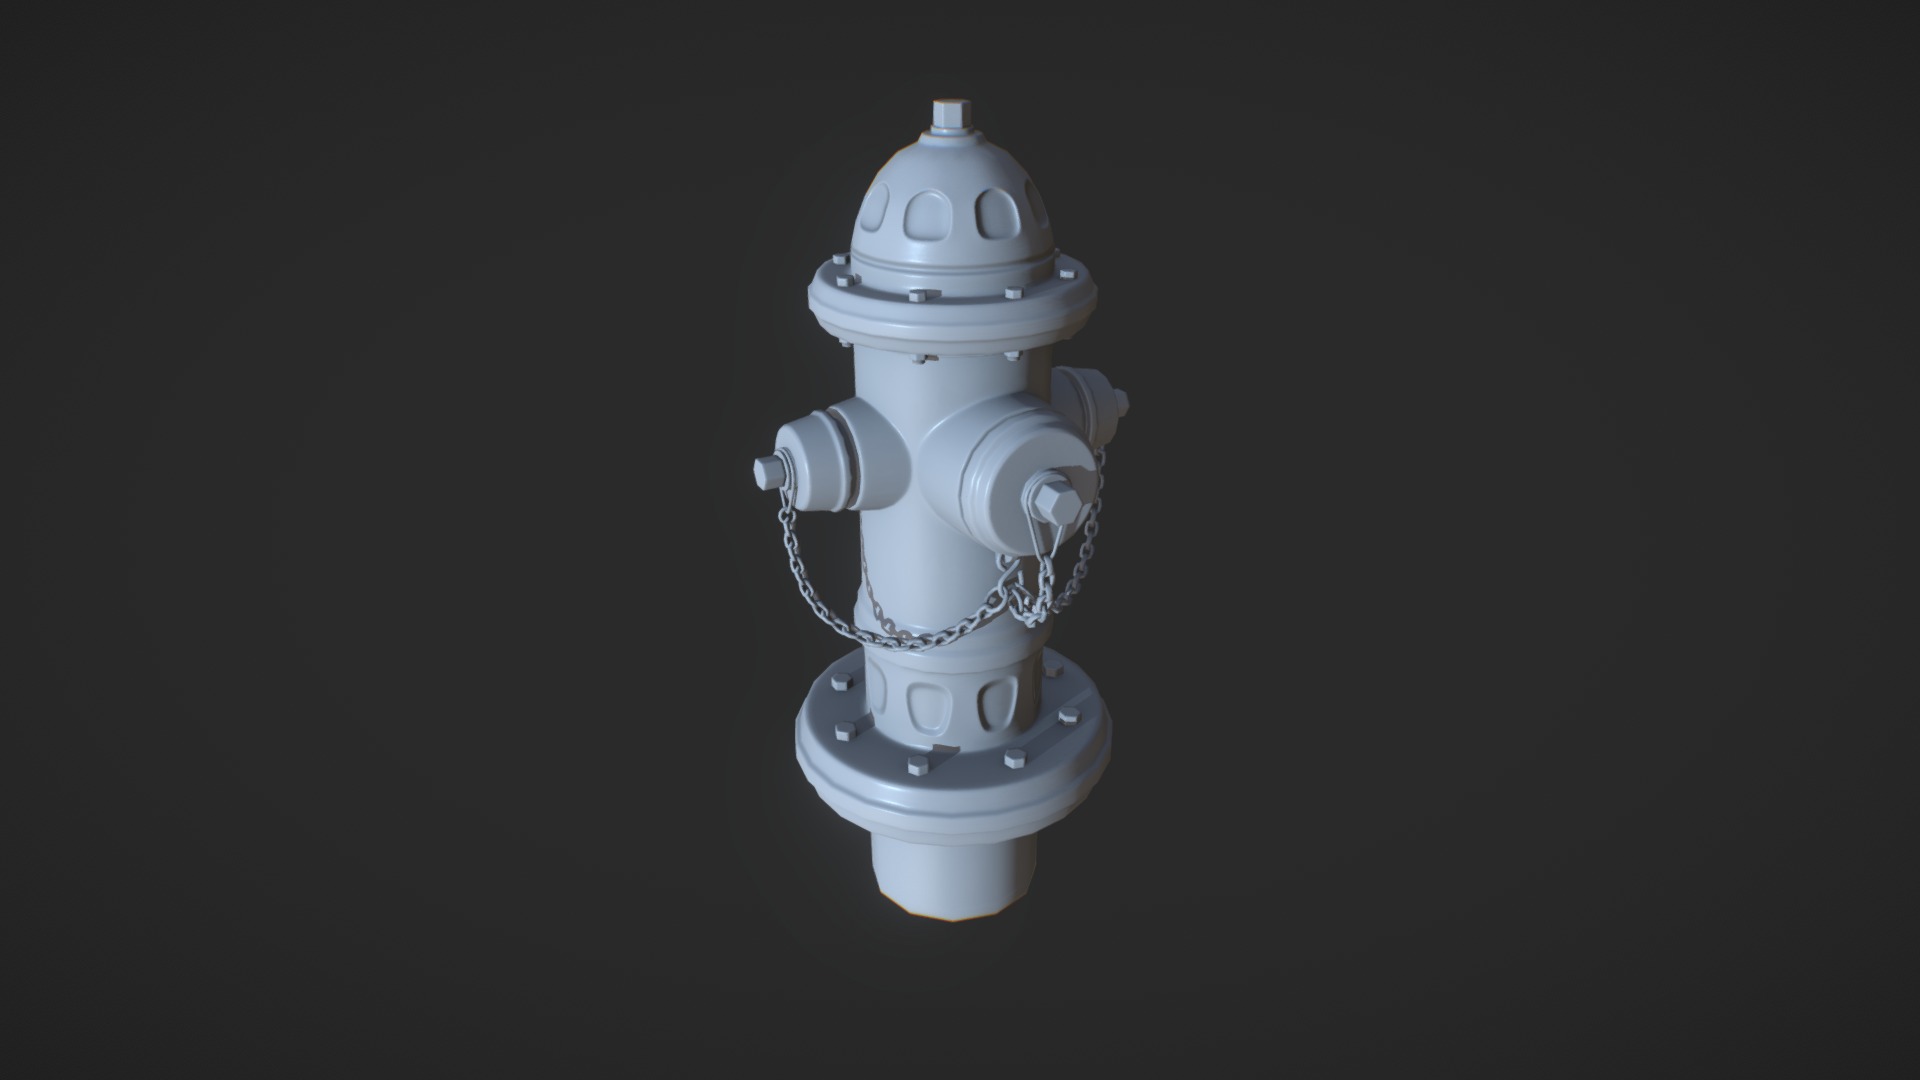 3D model Hydrant LowPoly Baked Normal / AO - This is a 3D model of the Hydrant LowPoly Baked Normal / AO. The 3D model is about a white and silver fire hydrant.